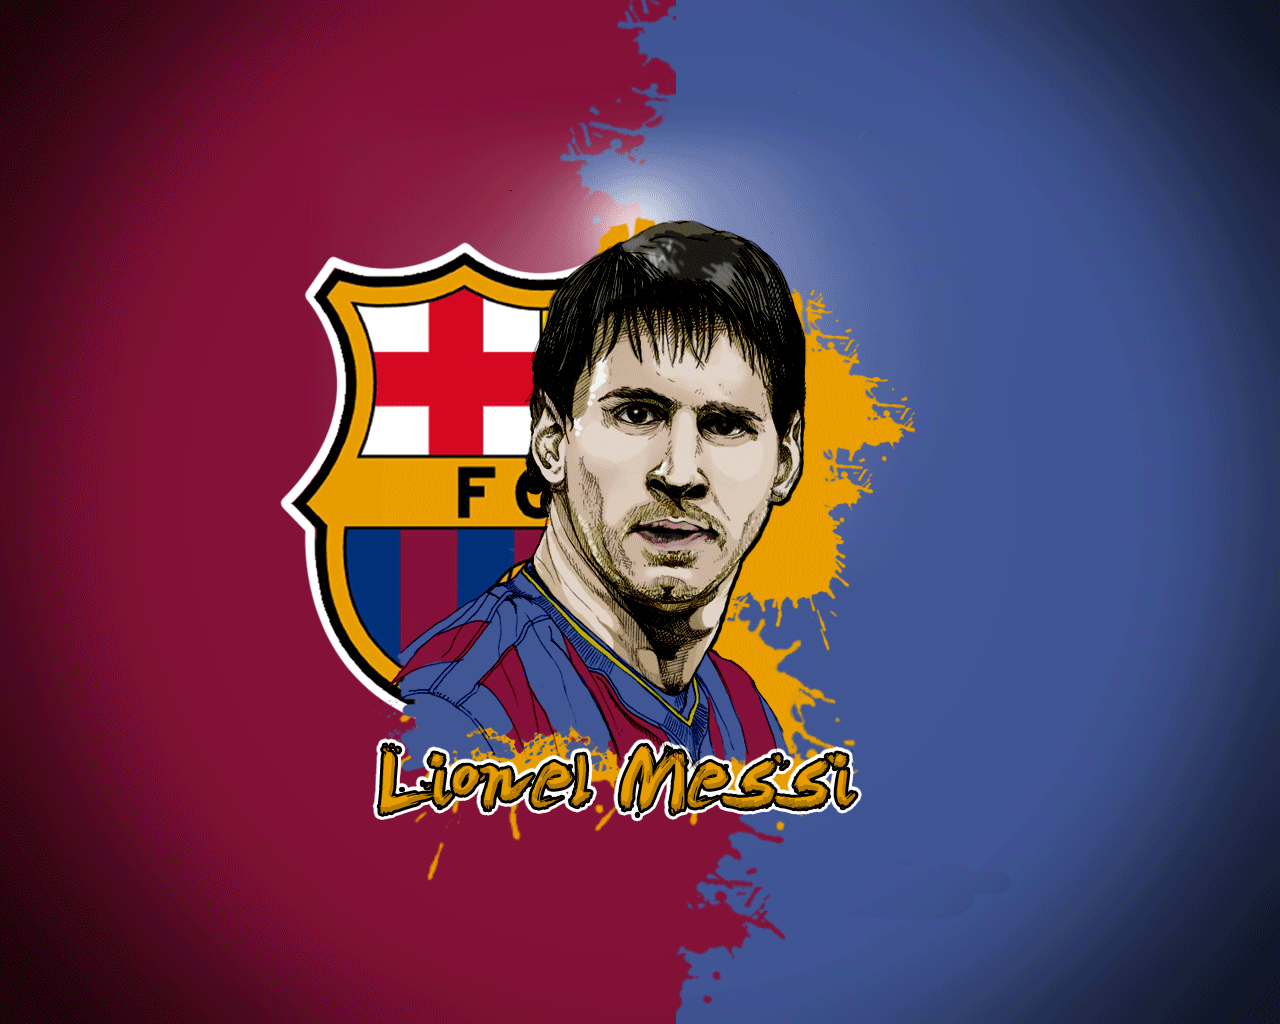 Free Lionel Messi Live Wallpaper Android APK Download For Android  GetJar